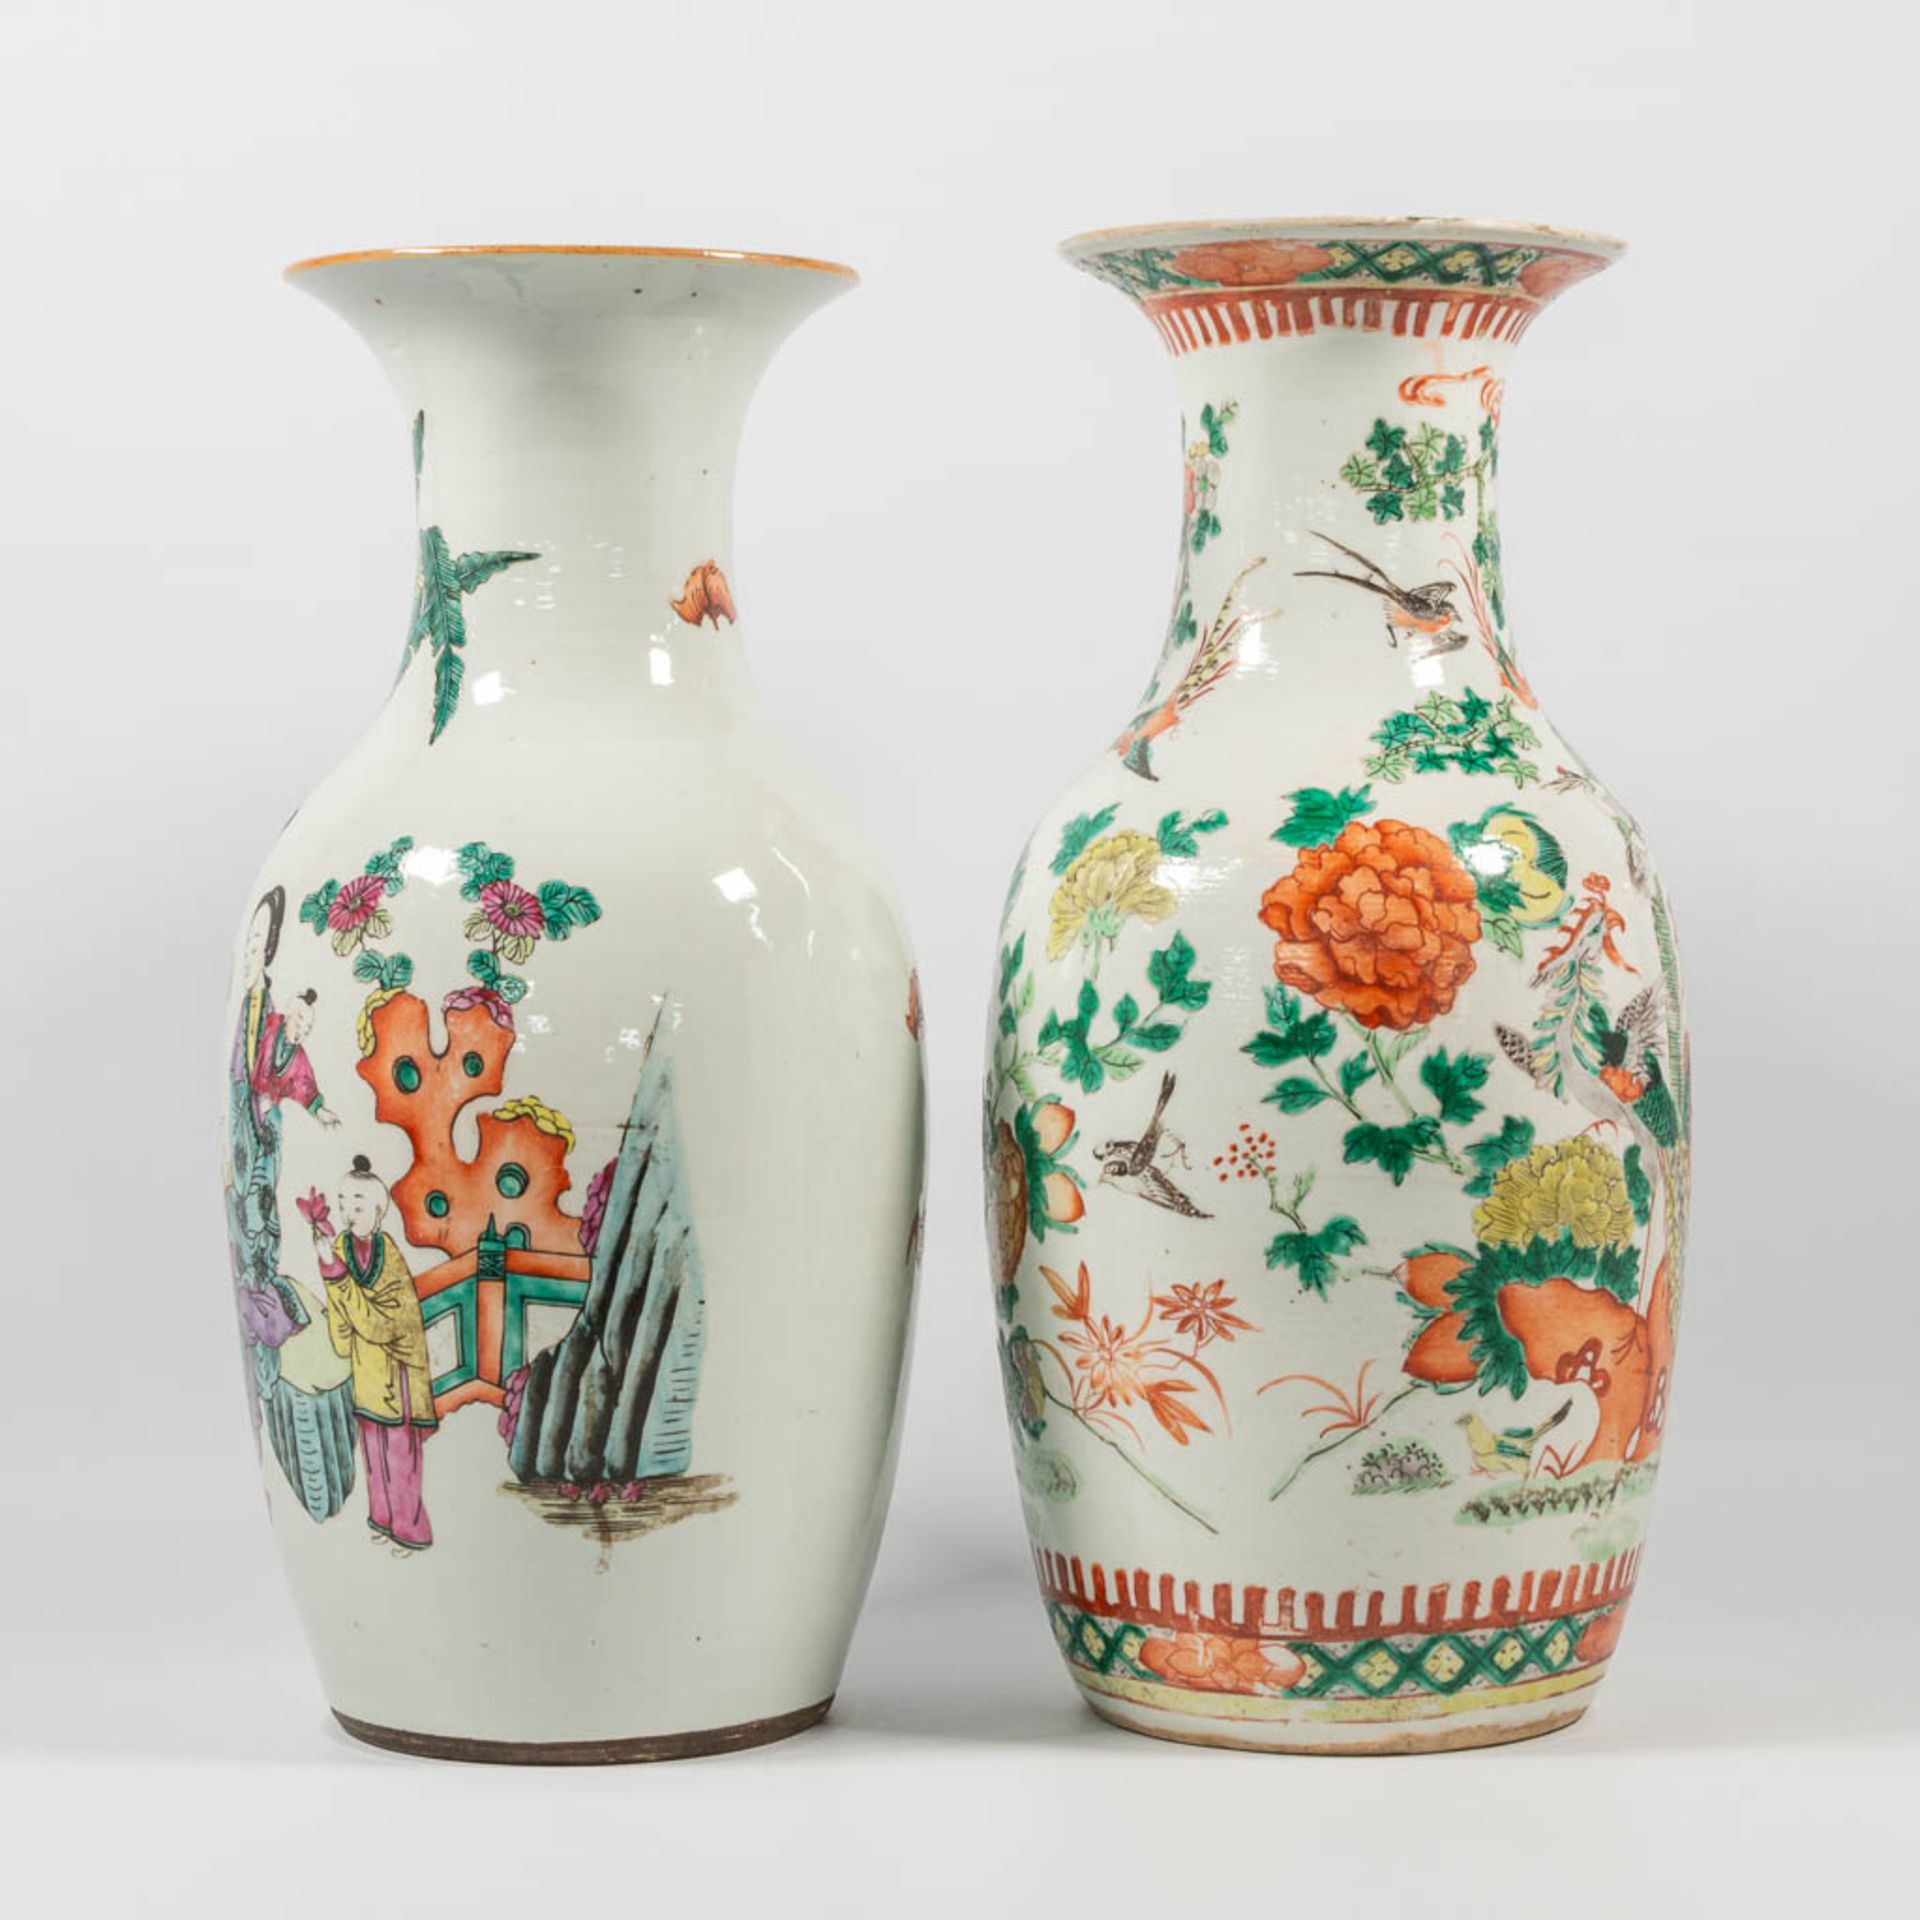 A collection of 2 Chinese vases, with decor of Ladies in court and peacocks. 19th/20th century. - Image 6 of 14